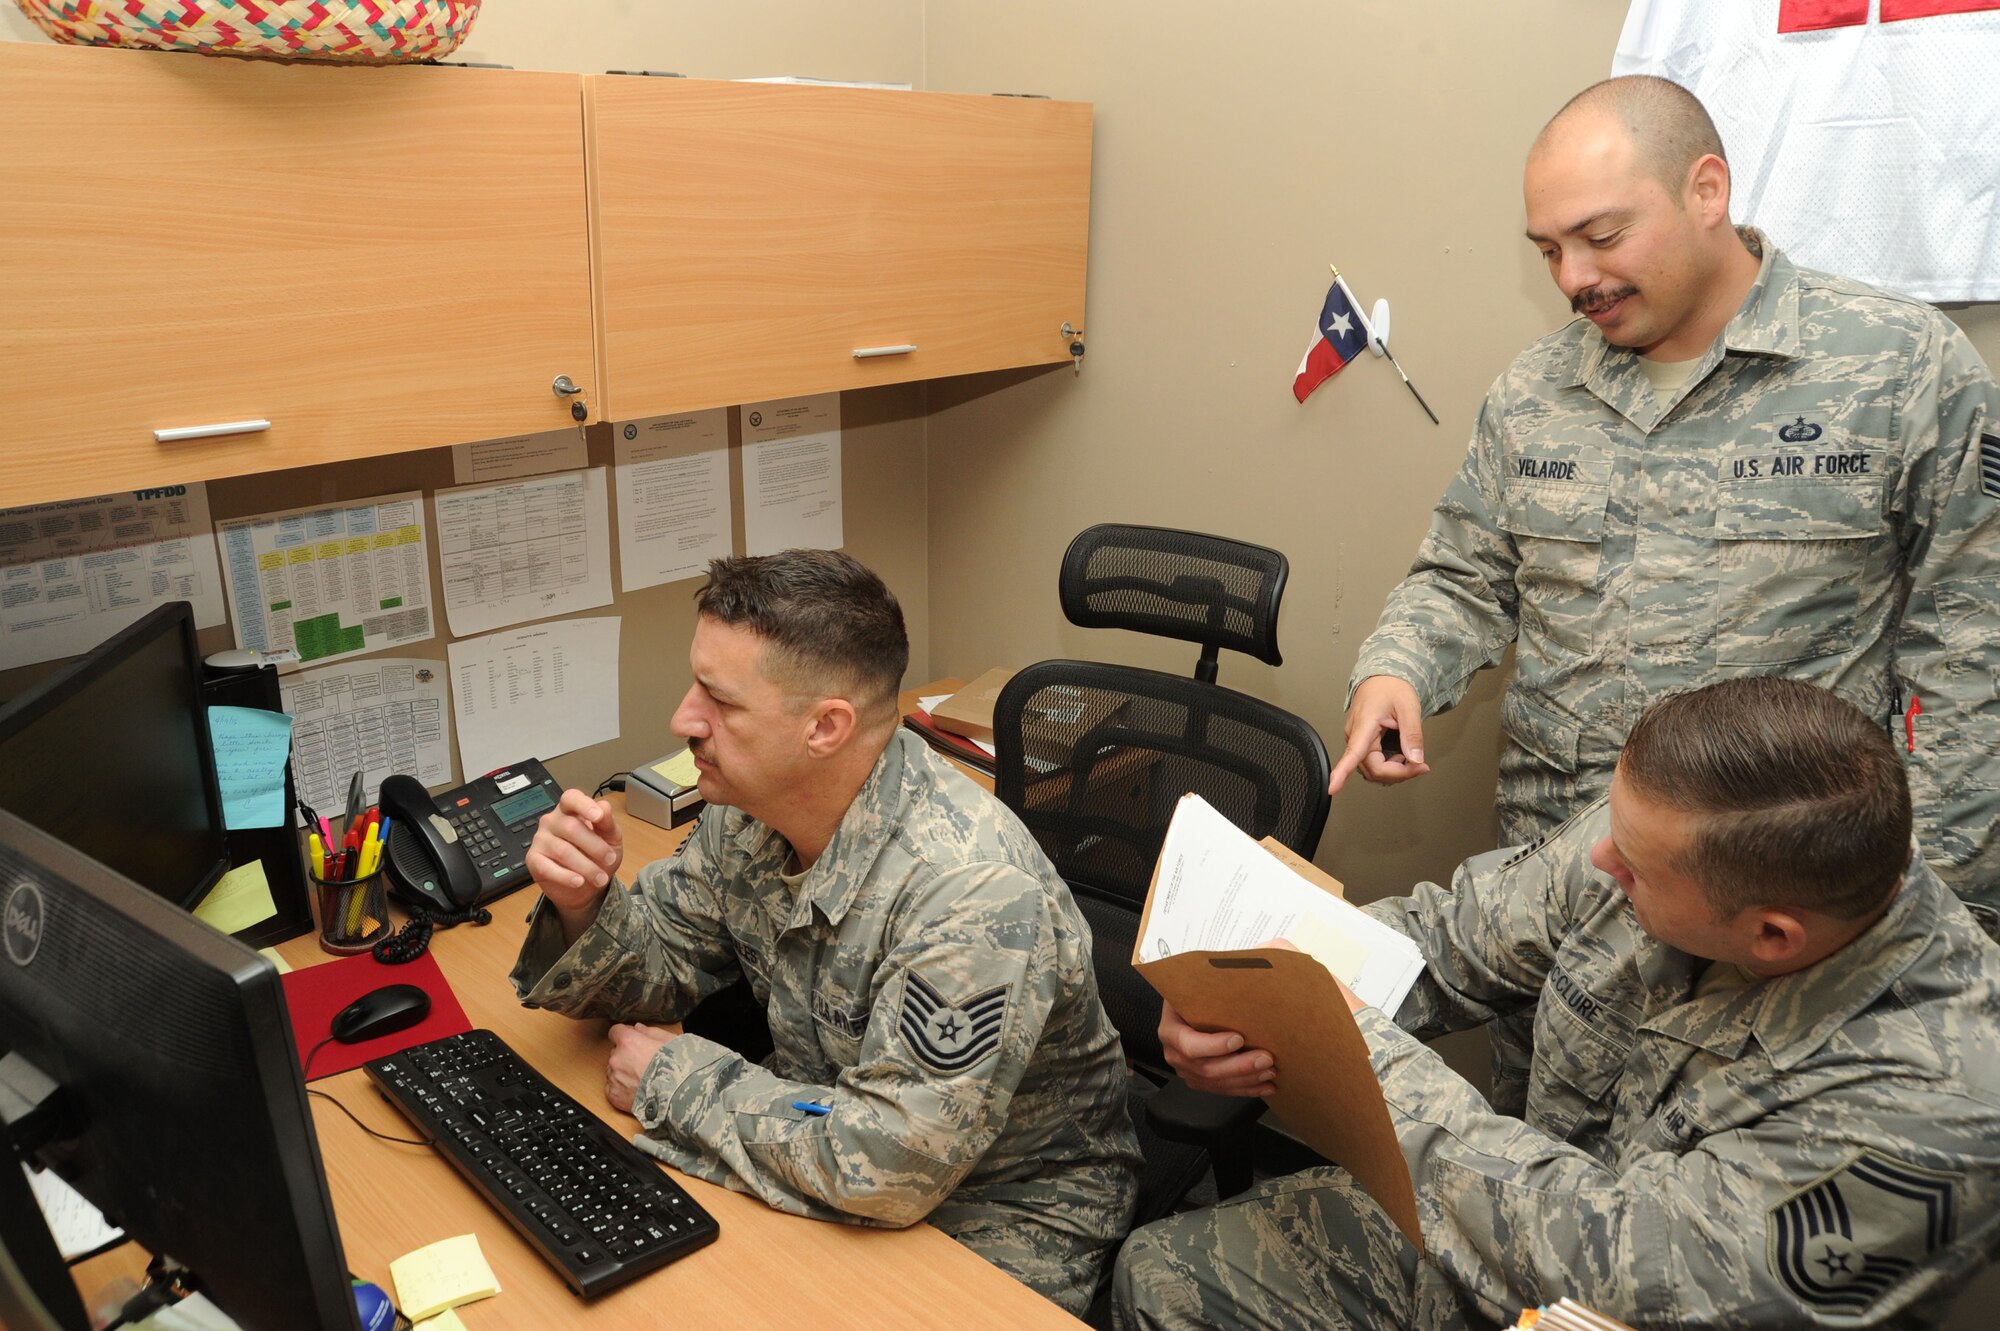 Tech Sgt. Christopher Gonzales, left, and Tech. Sgt. David Velarde, middle, 386th Expeditionary Contracting Squadron contracting officers, team up with Senior Master Sgt. Michael McClure, 386th Air Expeditionary Wing finance office superintendent, to obligate funds for a contract Sep. 29, 2016 at an undisclosed location in Southwest Asia. The finance office and the 386 ECONS worked together for about 180 hours during the close of fiscal year 2016. (U.S. Air Force photo/Senior Airman Zachary Kee)